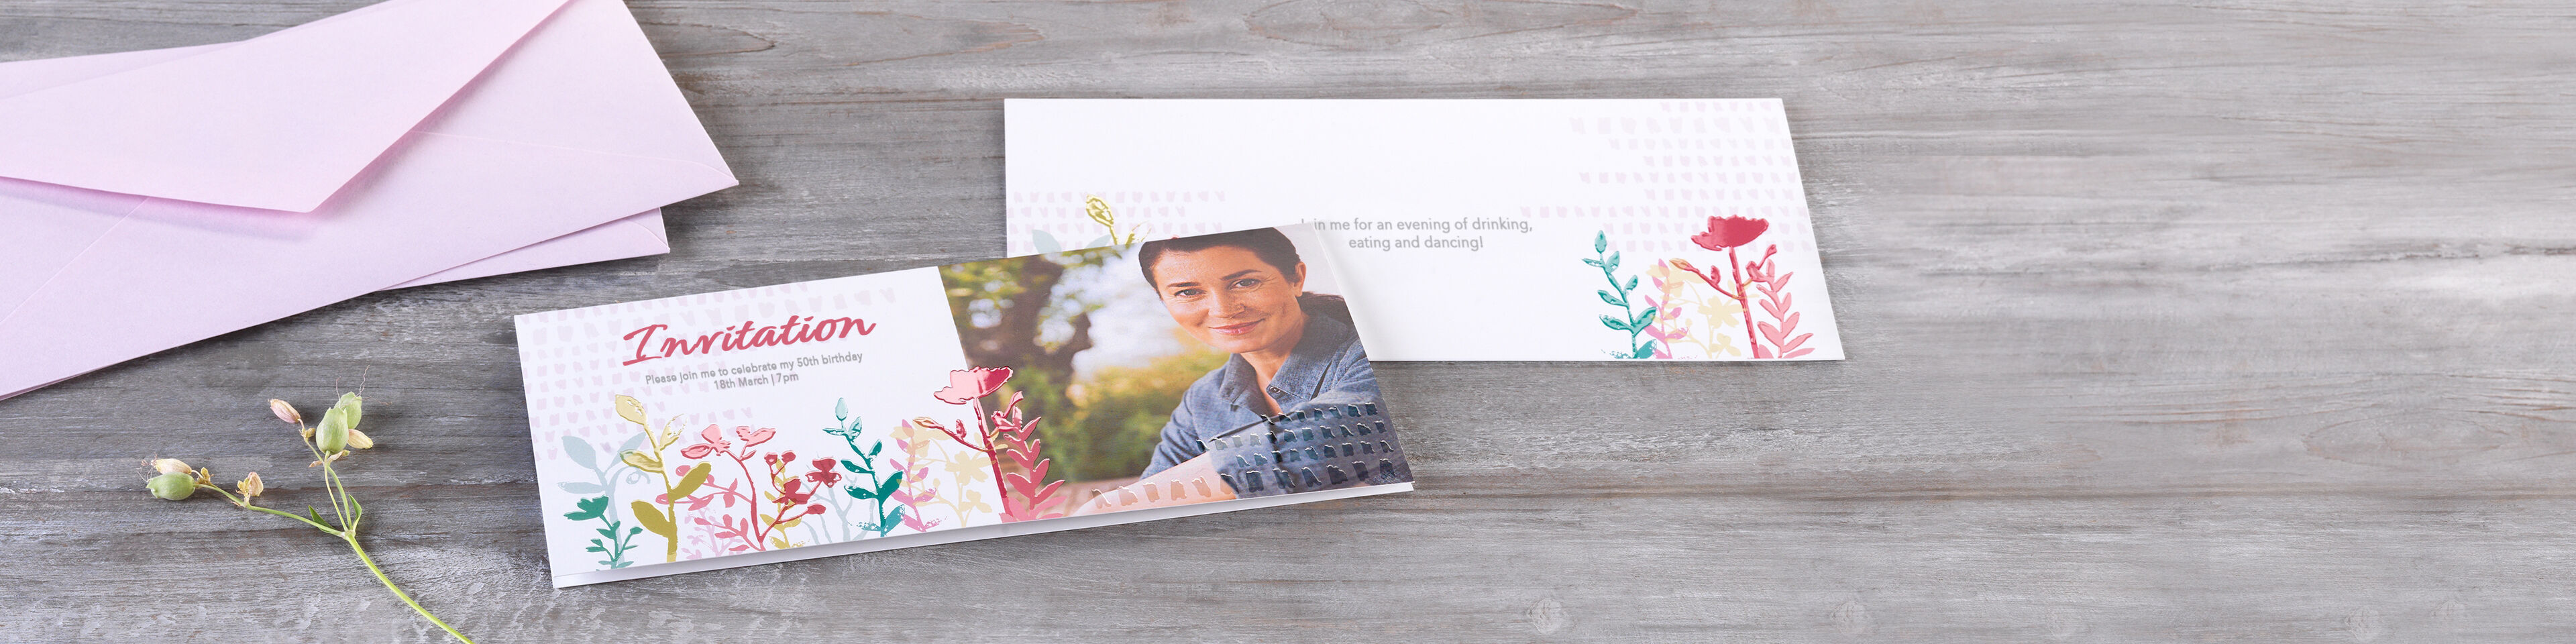 long folded invitation card, personalised with photos and text